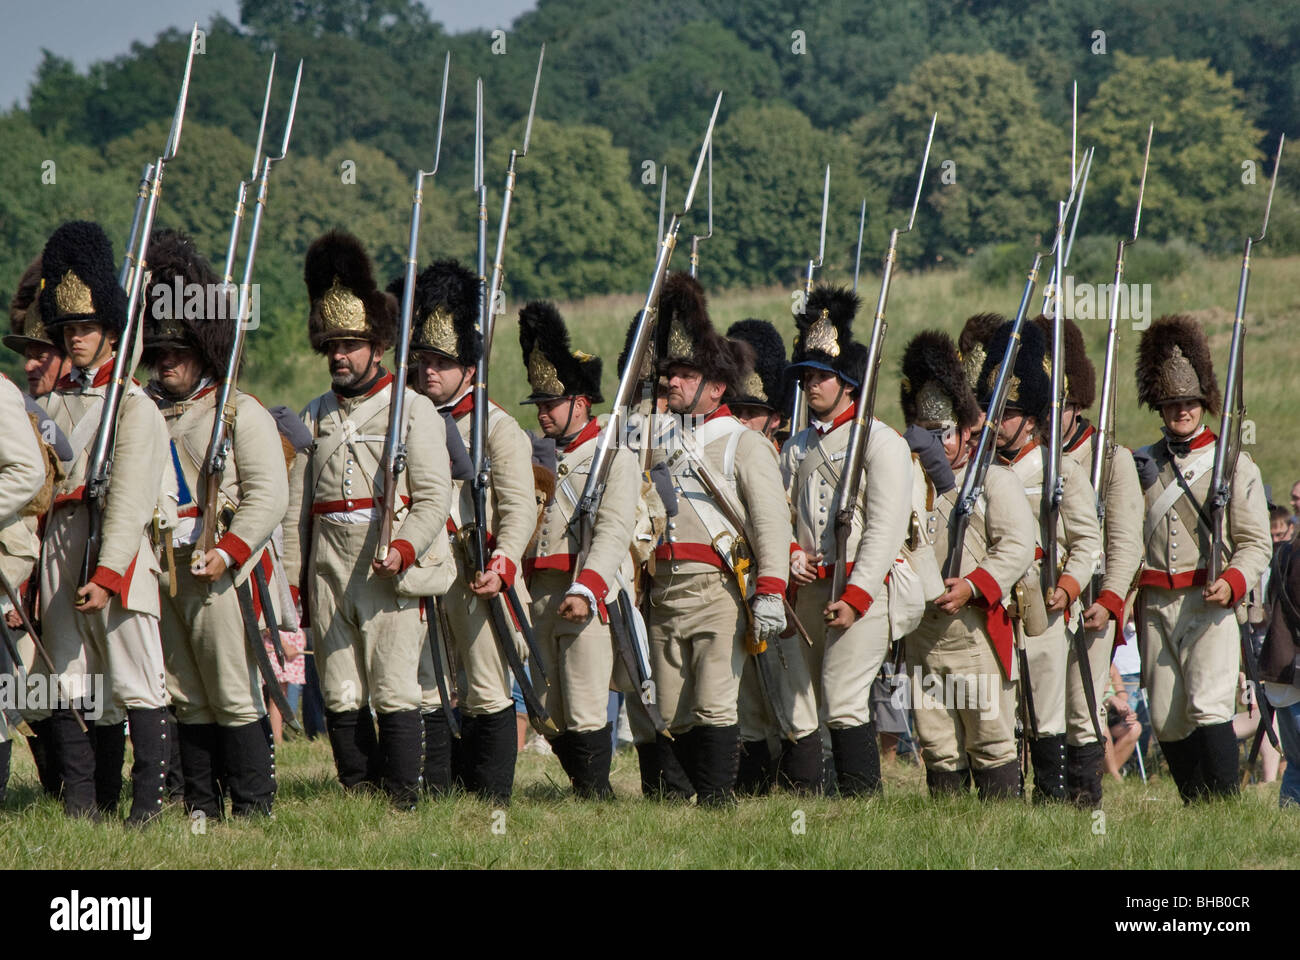 Prussian troops at reenactment of the Siege of Neisse during Napoleonic War with Prussia in 1807 at Nysa, Opolskie, Poland Stock Photo